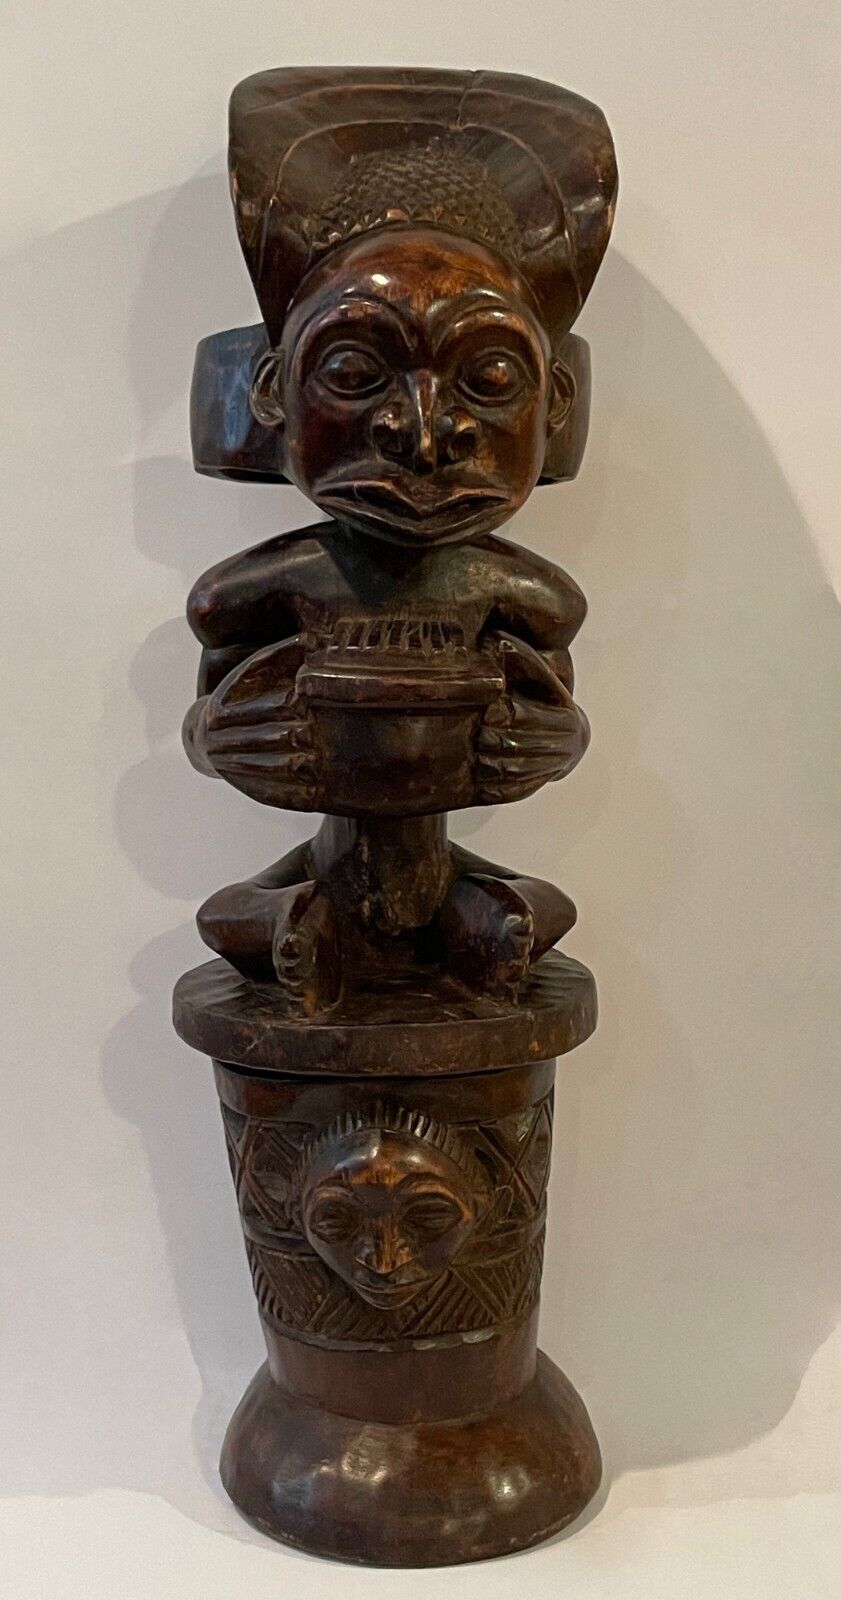 Vintage African Chokwe Snuffbox Figurine, Ultra-Rare, From Central Africa